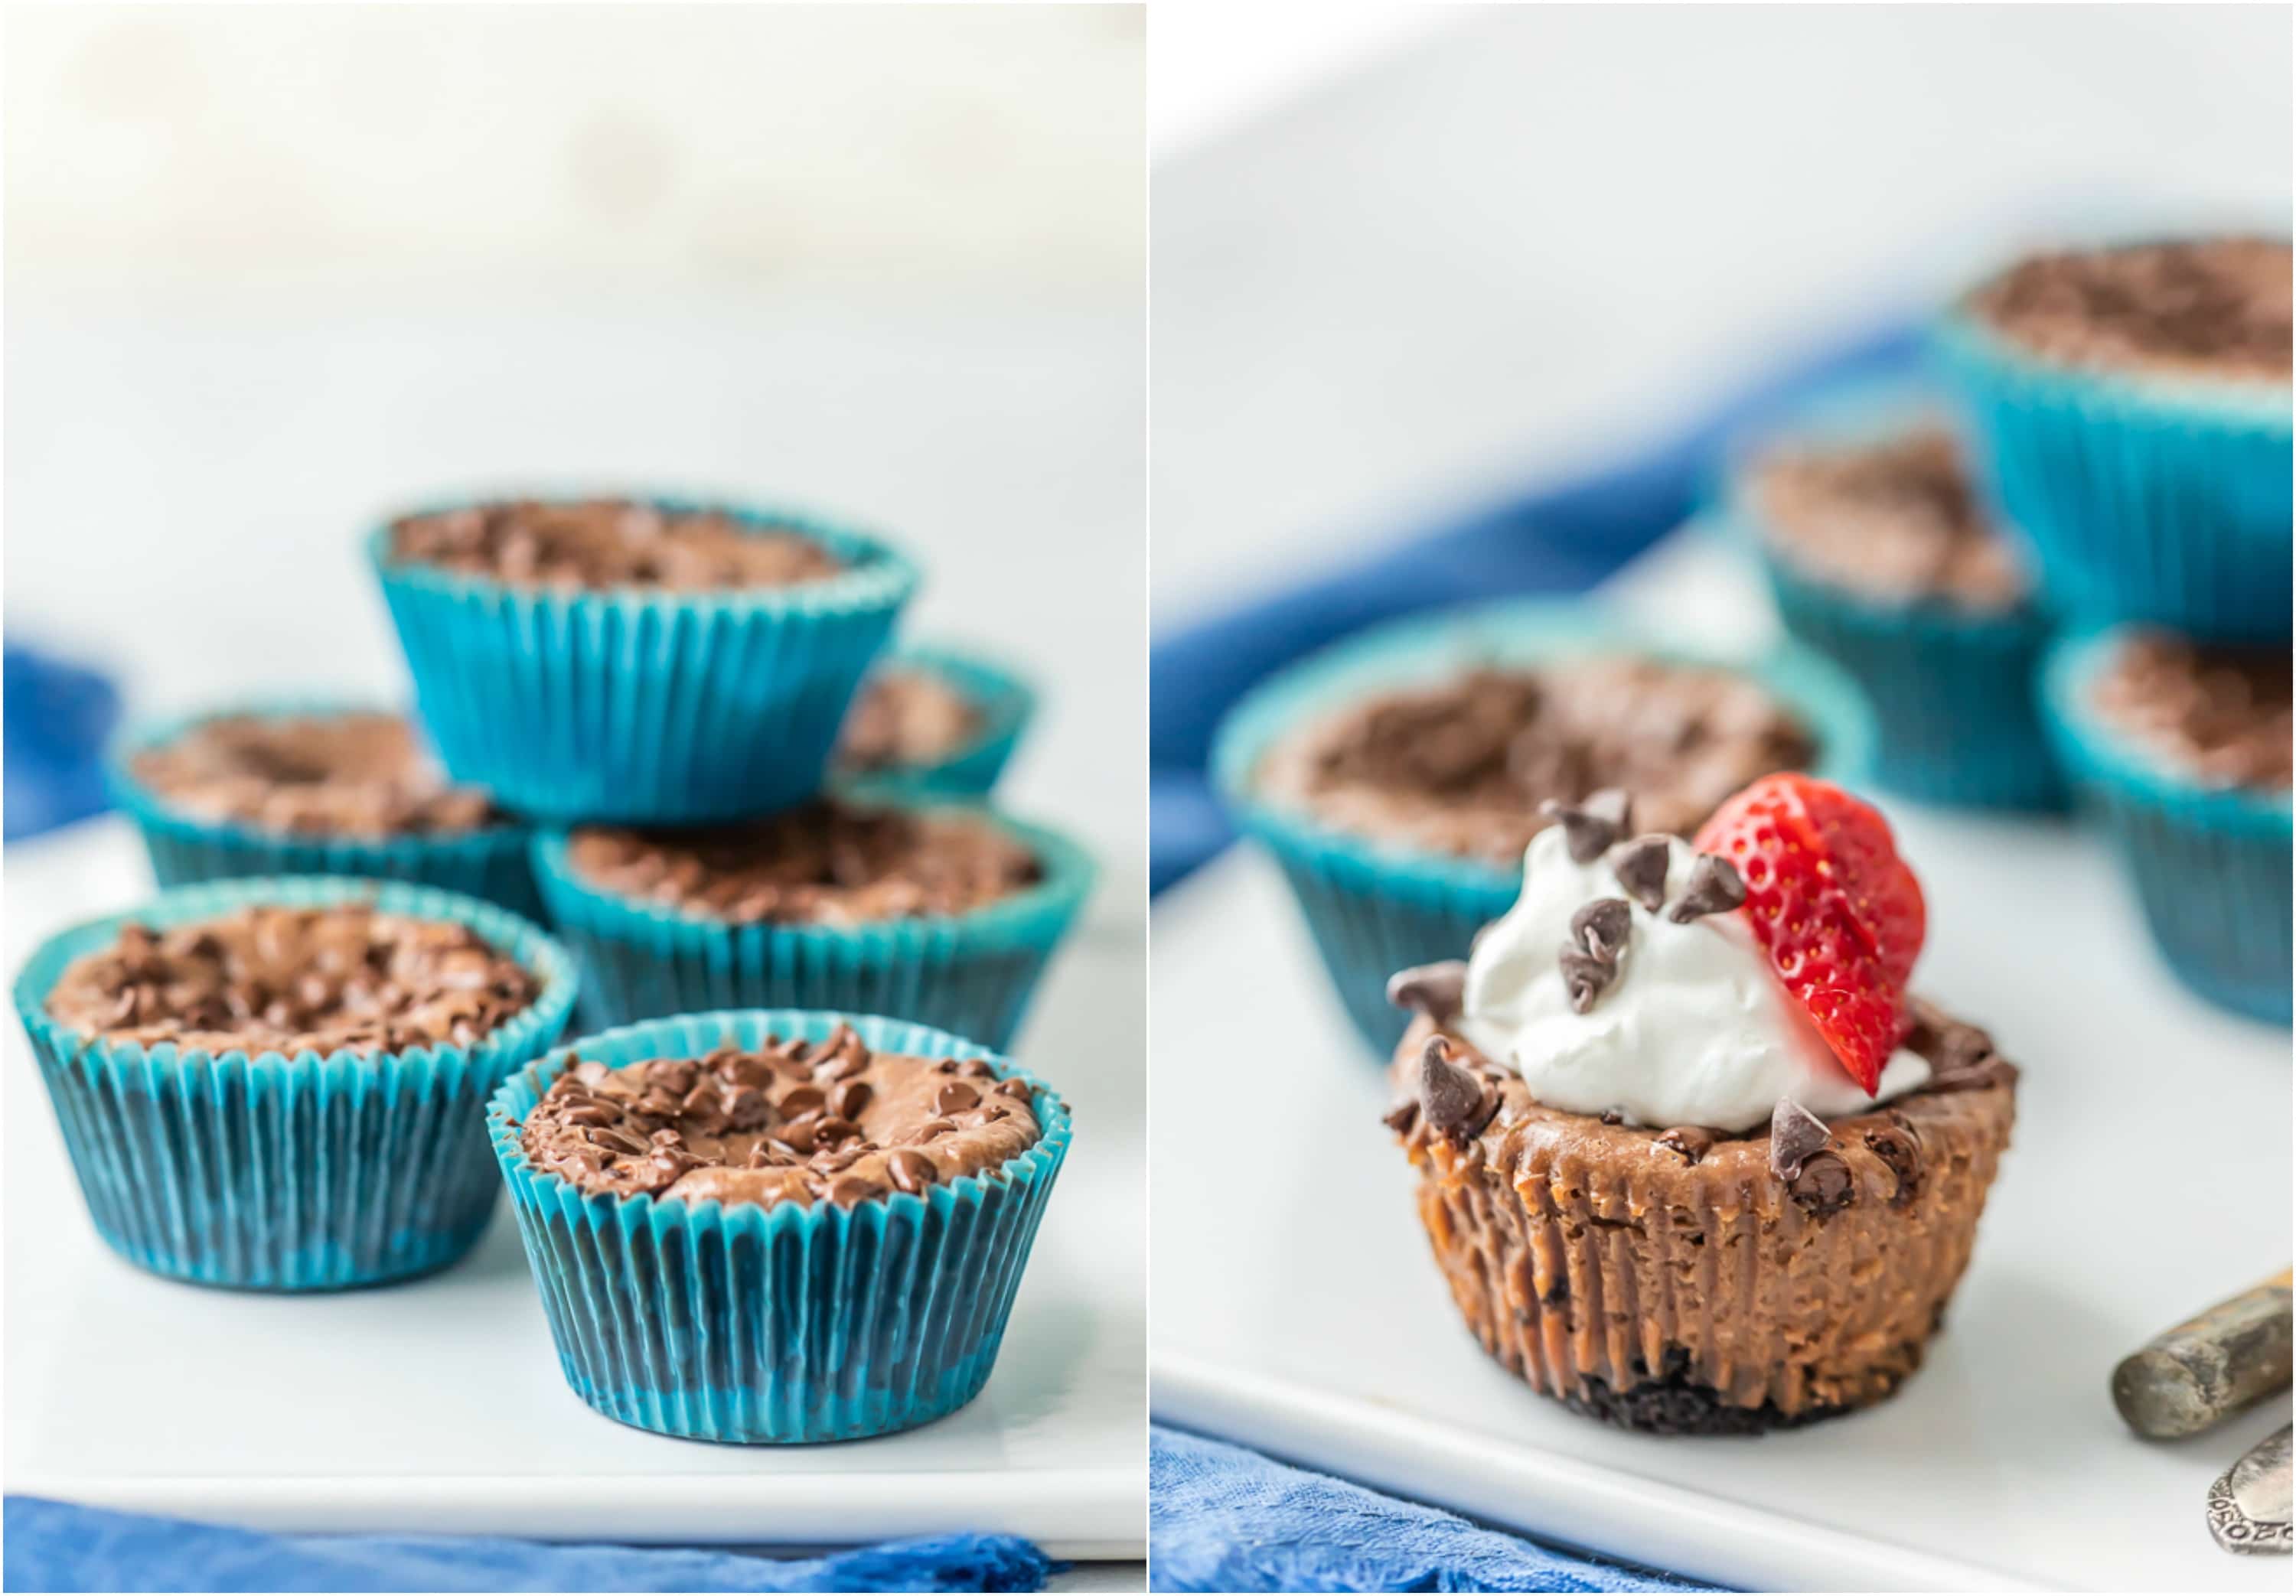 MINI NUTELLA CHEESECAKES are the perfect EASY DESSERT RECIPE perfect for any occasion. So creamy, delicious, and addicting. Good luck eating only one!